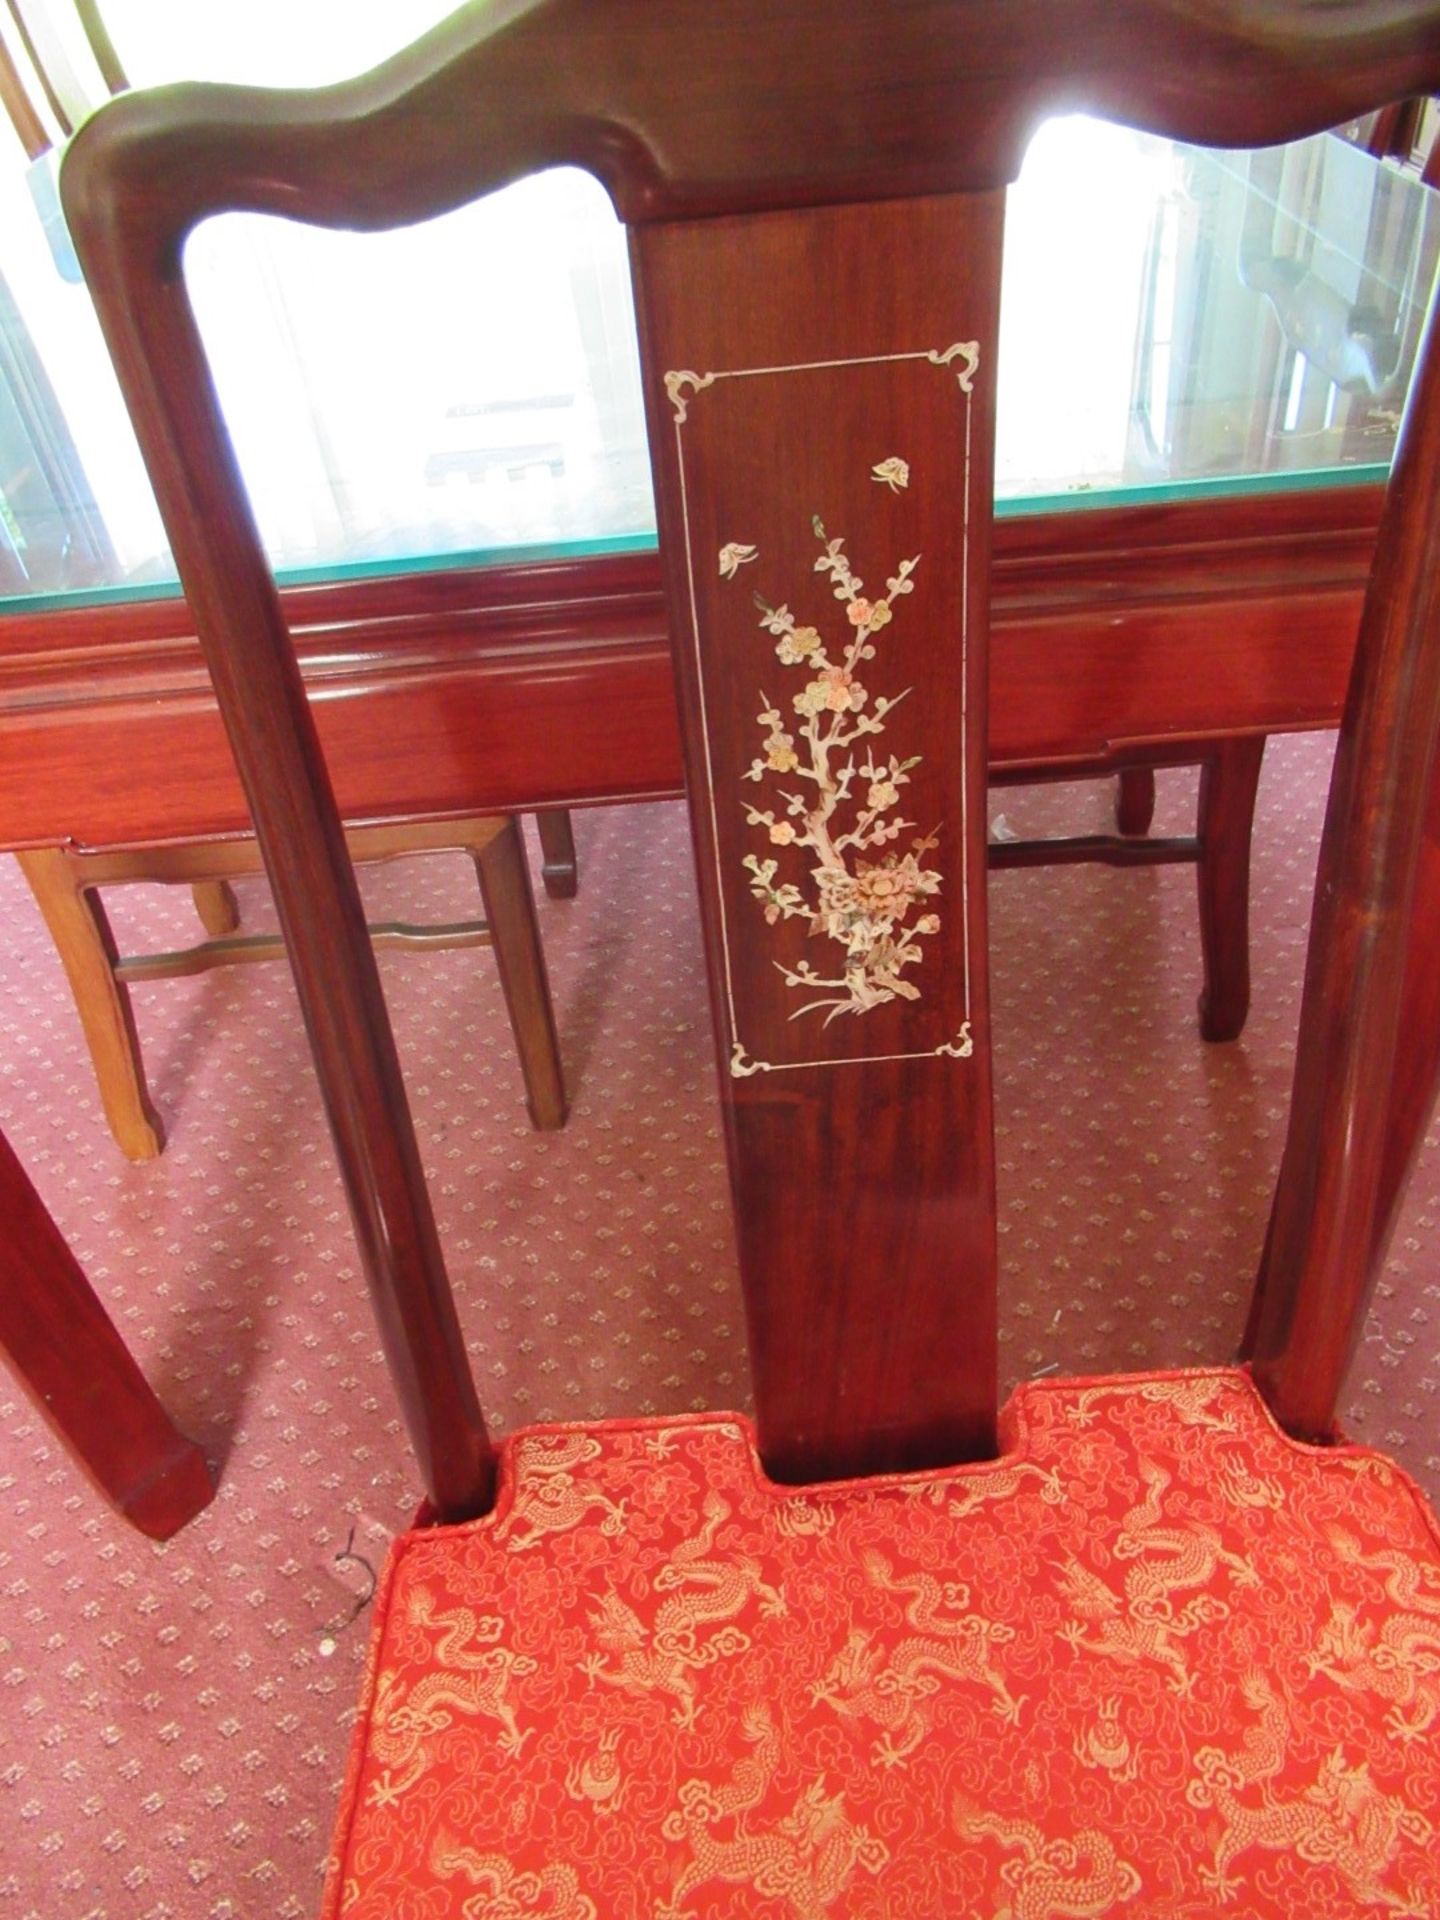 Rosewood Effect Glazed Dining Room Table with Oriental Themed Inlays and 6 Matching Dining Room - Image 6 of 7